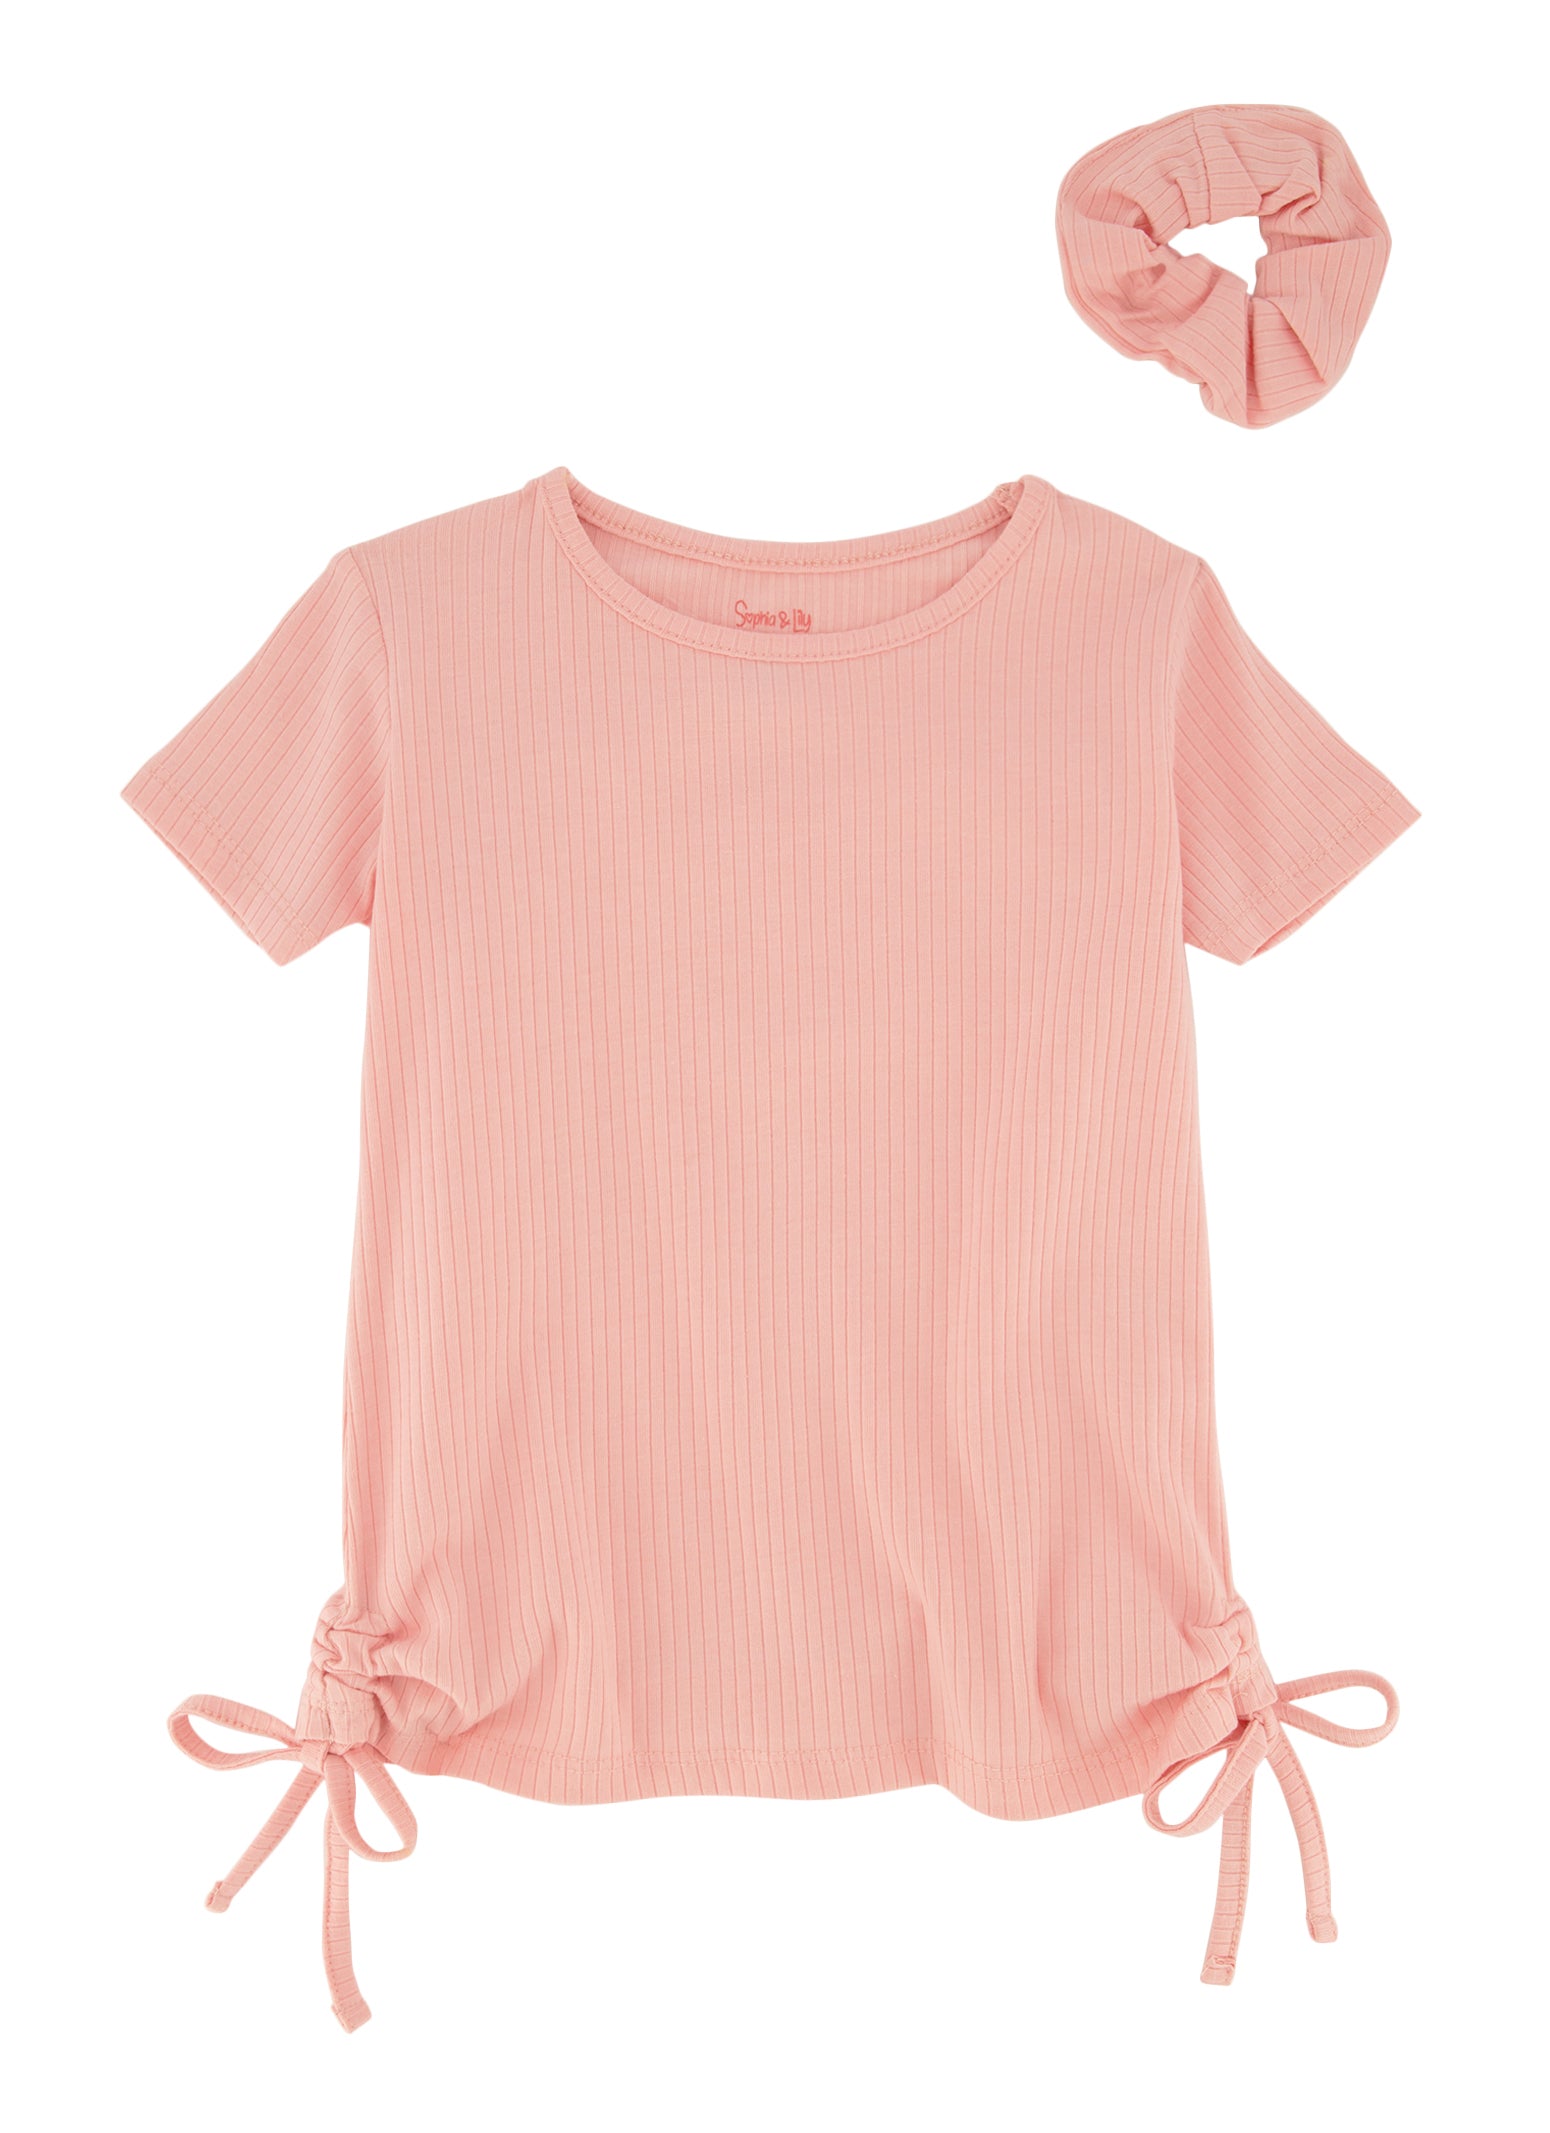 Little Girls Ruched Drawstring Tee with Scrunchie, Pink, Size 6X